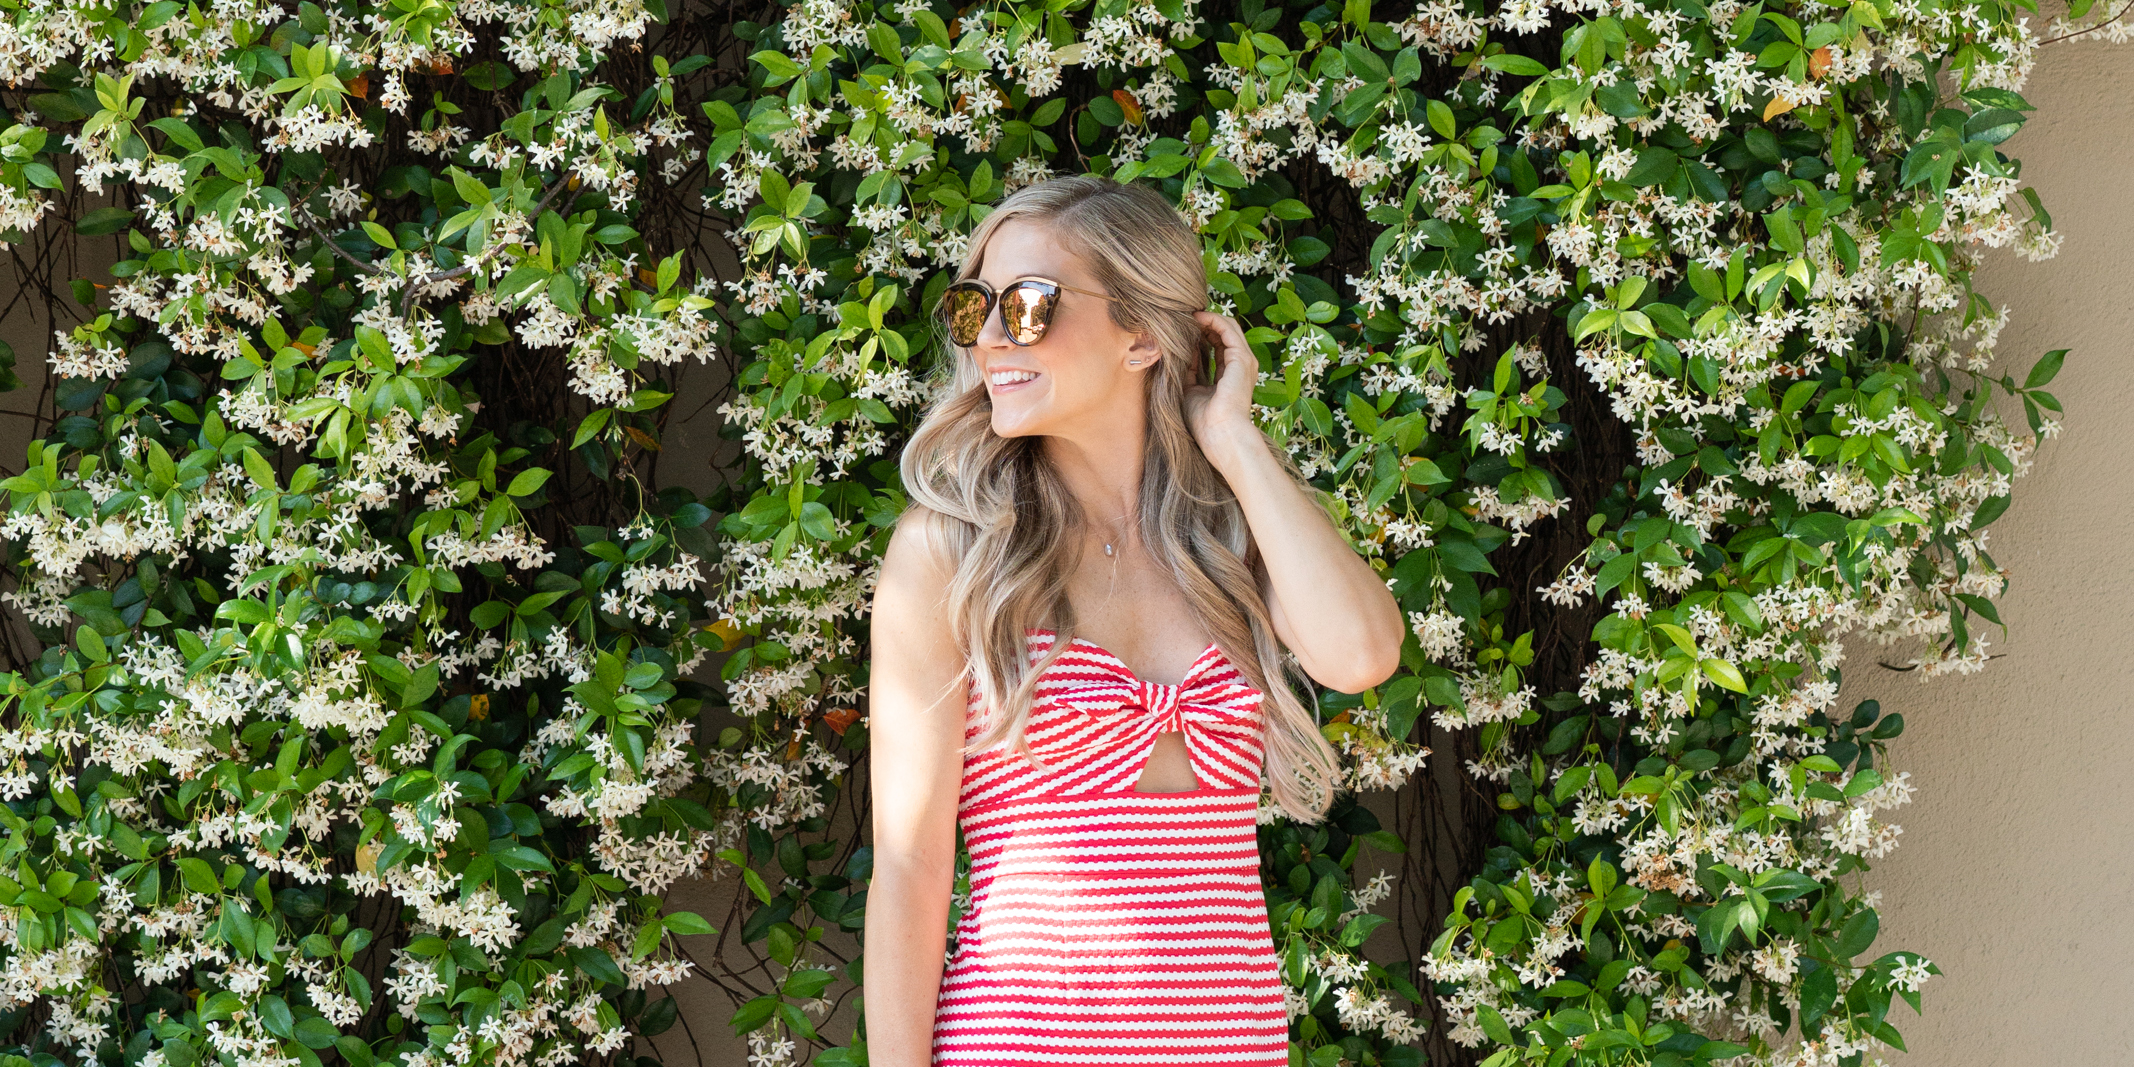 Charleston fashion blogger wearing a red striped dress and sunglasses